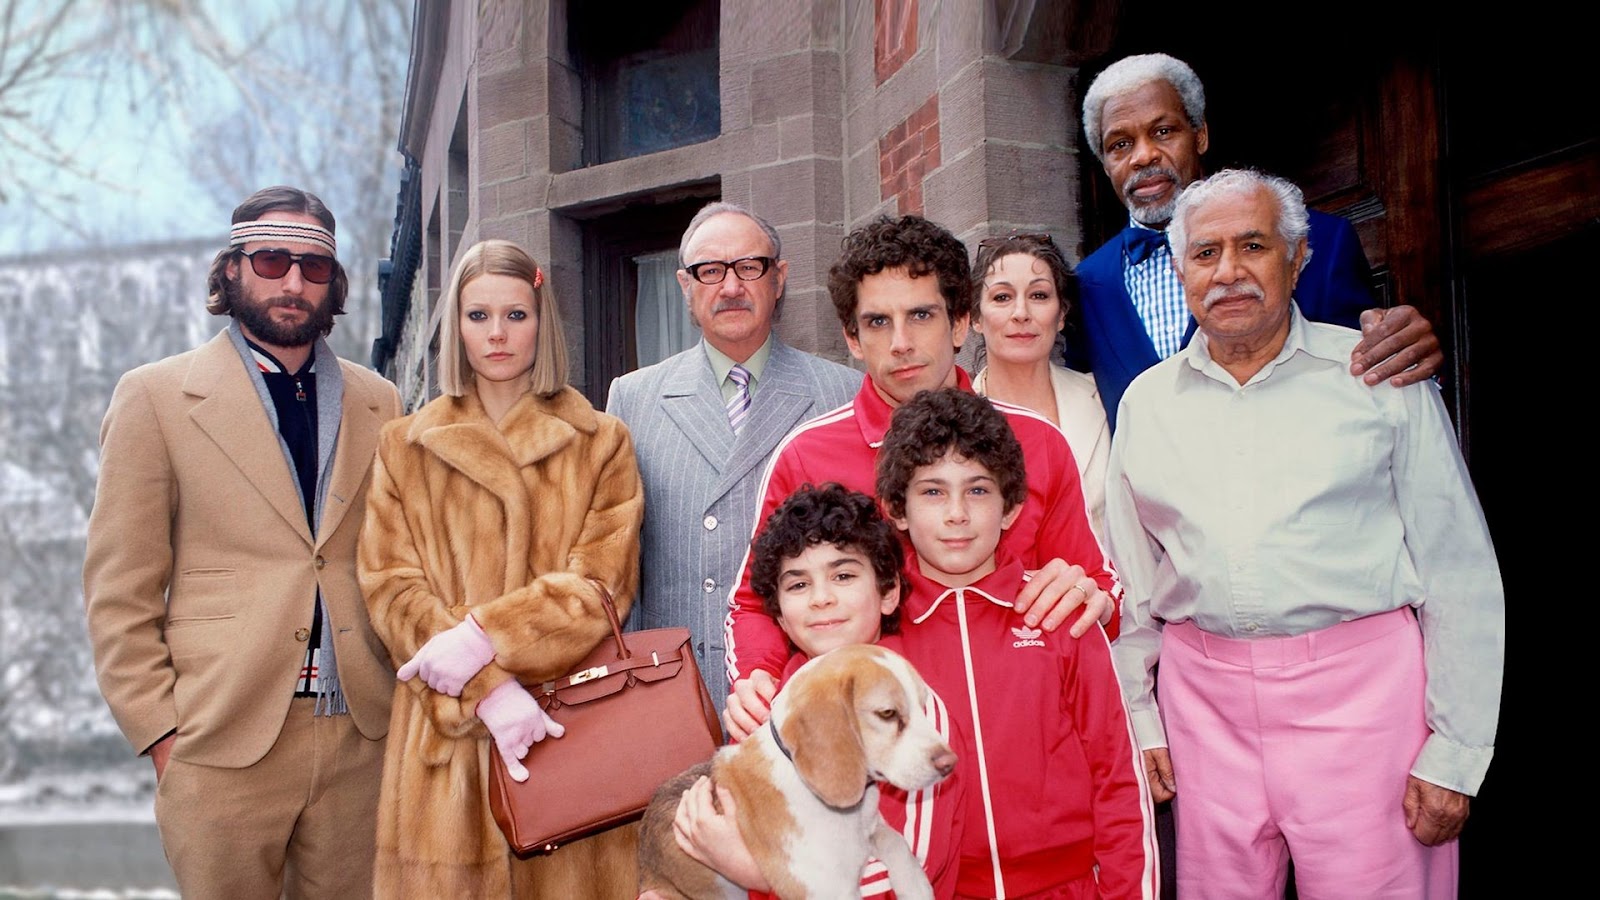 A still from Wes Anderson's 'The Royal Tenenbaums' (2001), the colorful cast in huddled for a group photo.